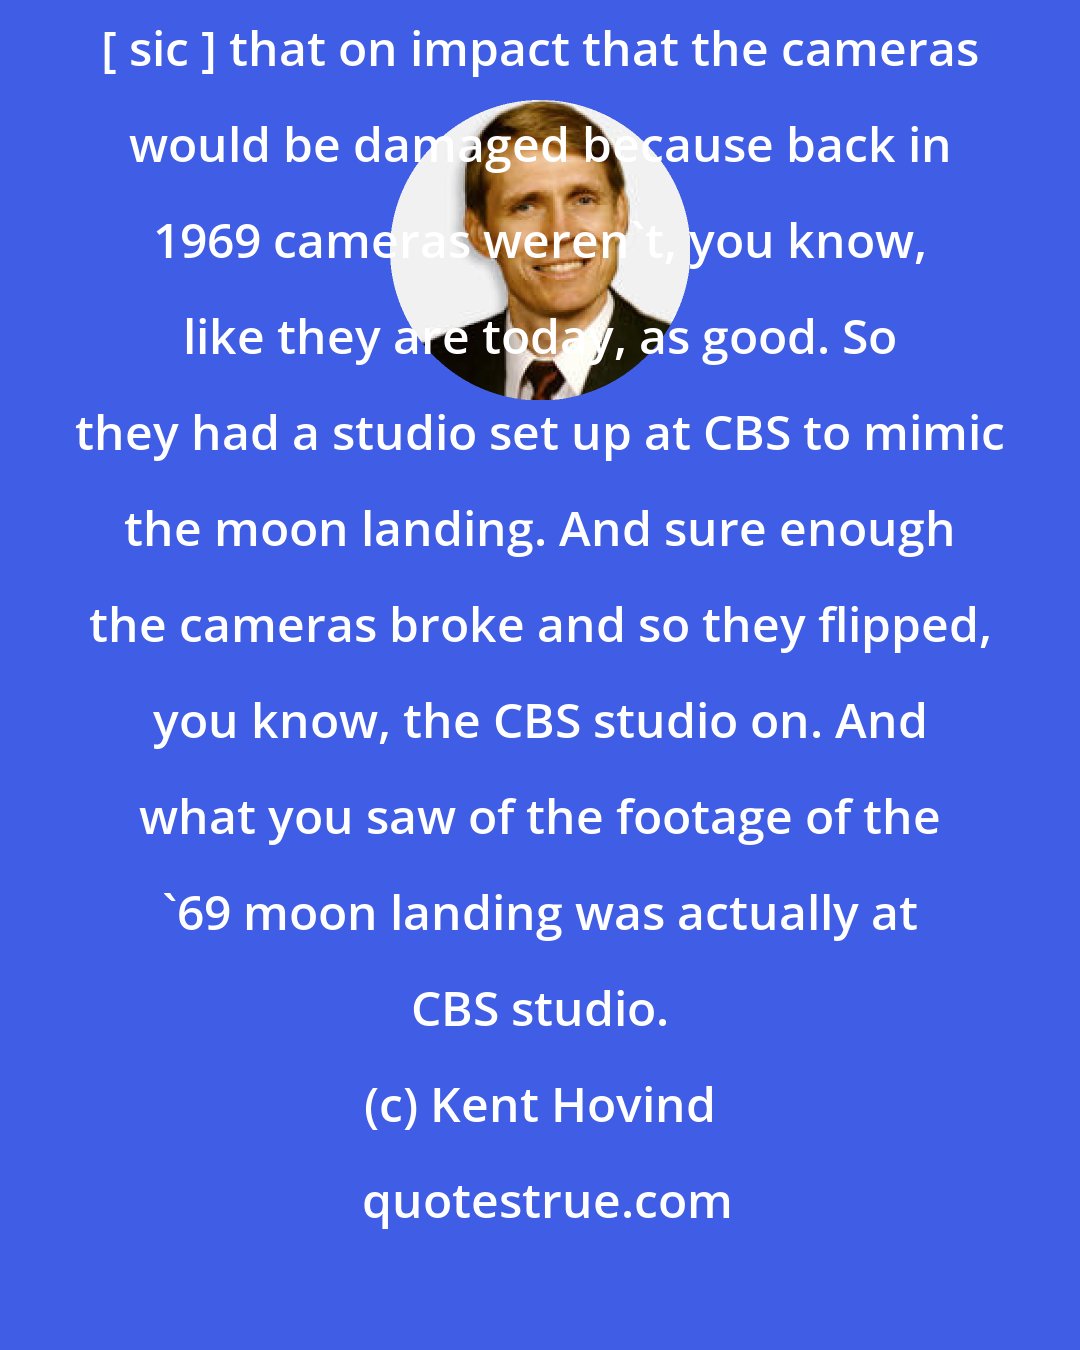 Kent Hovind: My take on what happened with the moon landing was [......] they suspect [ sic ] that on impact that the cameras would be damaged because back in 1969 cameras weren't, you know, like they are today, as good. So they had a studio set up at CBS to mimic the moon landing. And sure enough the cameras broke and so they flipped, you know, the CBS studio on. And what you saw of the footage of the '69 moon landing was actually at CBS studio.